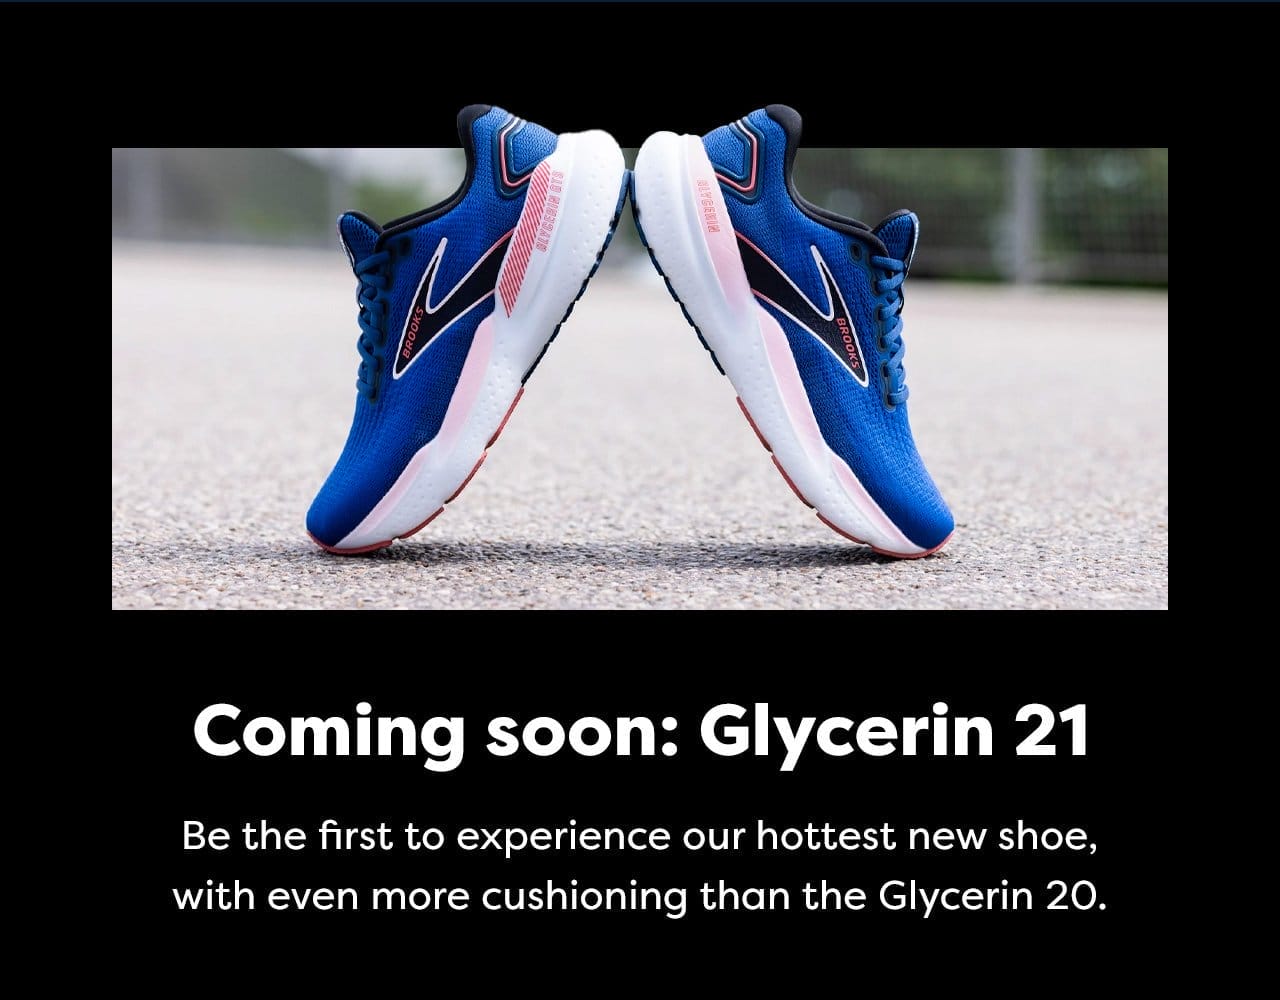 Coming soon: Glycerin 21 - Be the first to experience our hottest new shoe, with even more cushioning than the Glycerin 20.